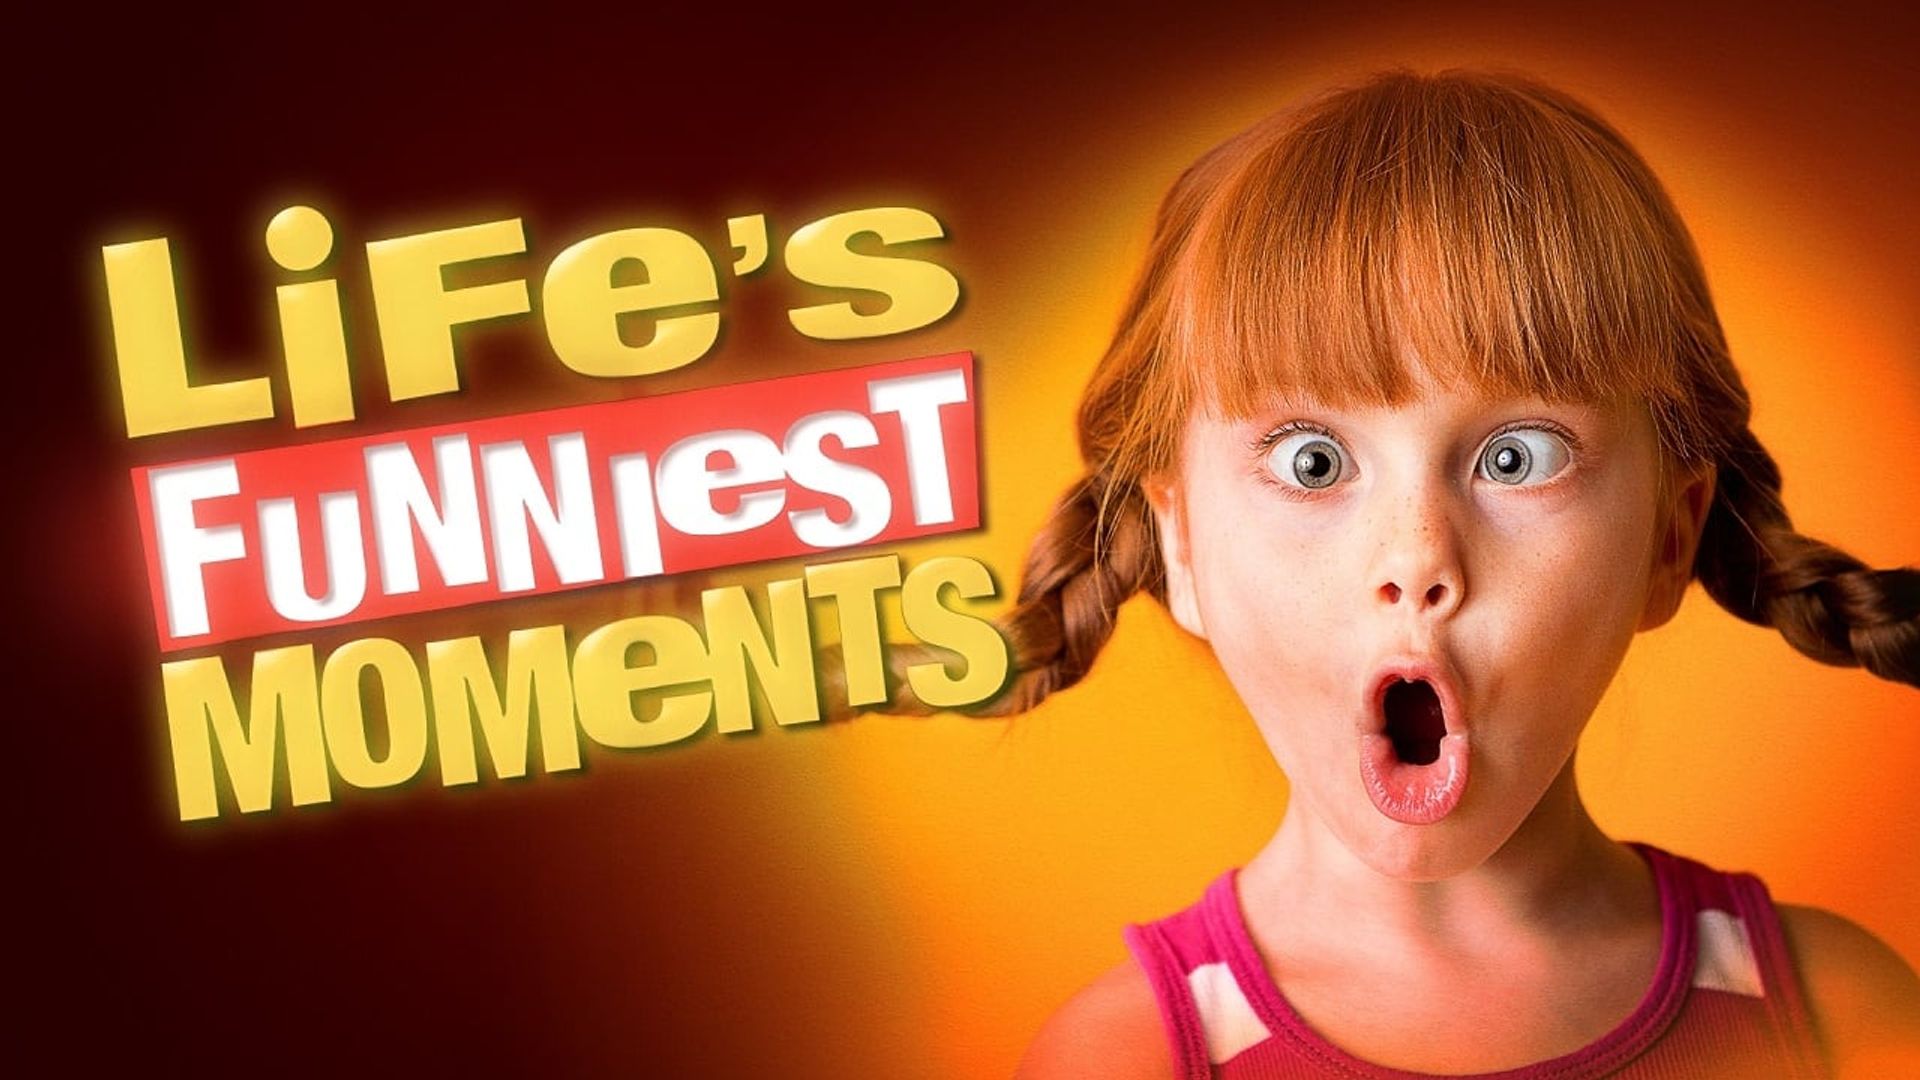 Life's Funniest Moments background